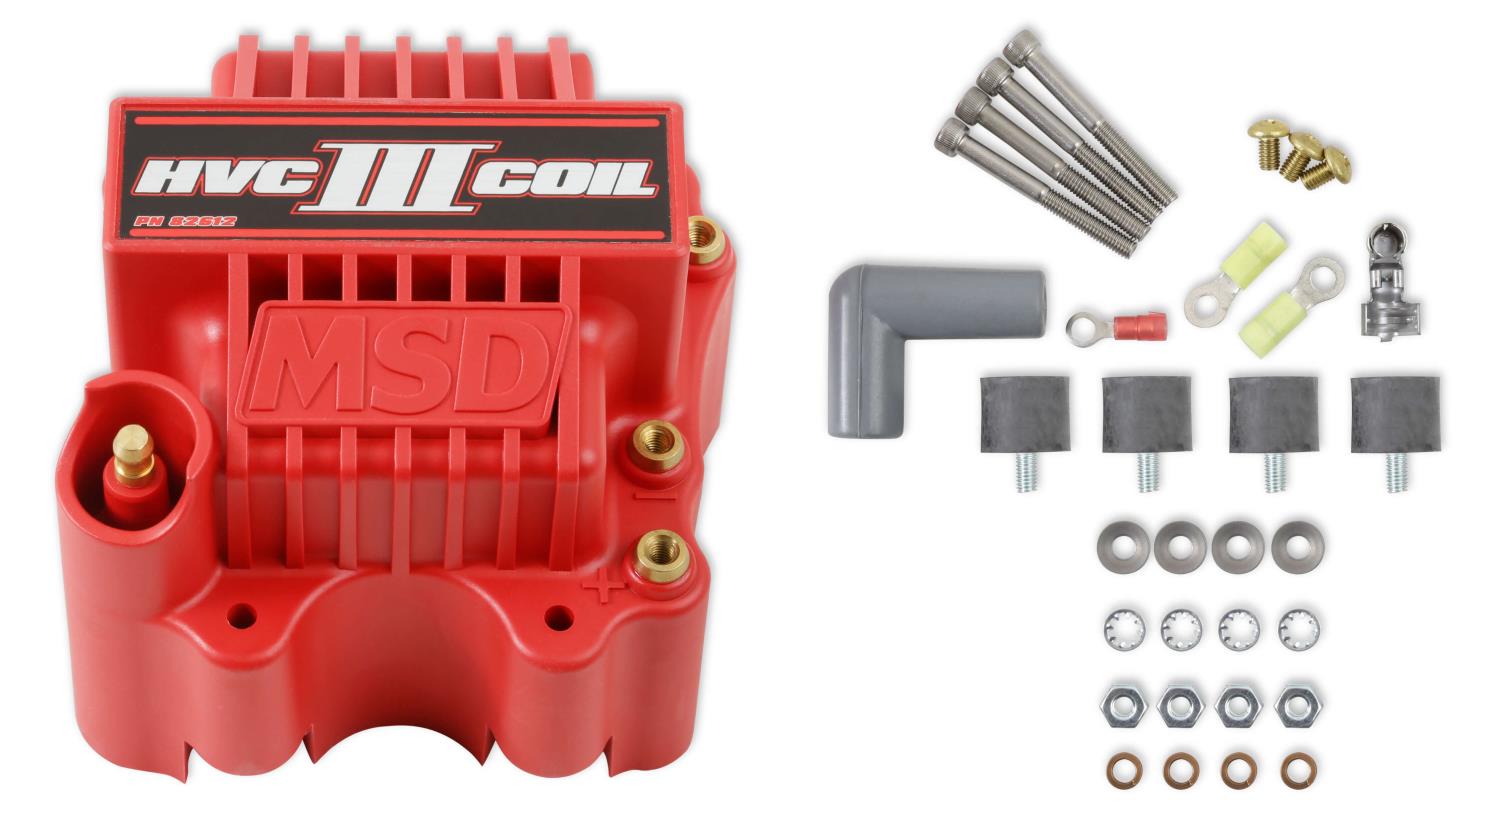 HVC-III Series Ignition Coil - Red Finish